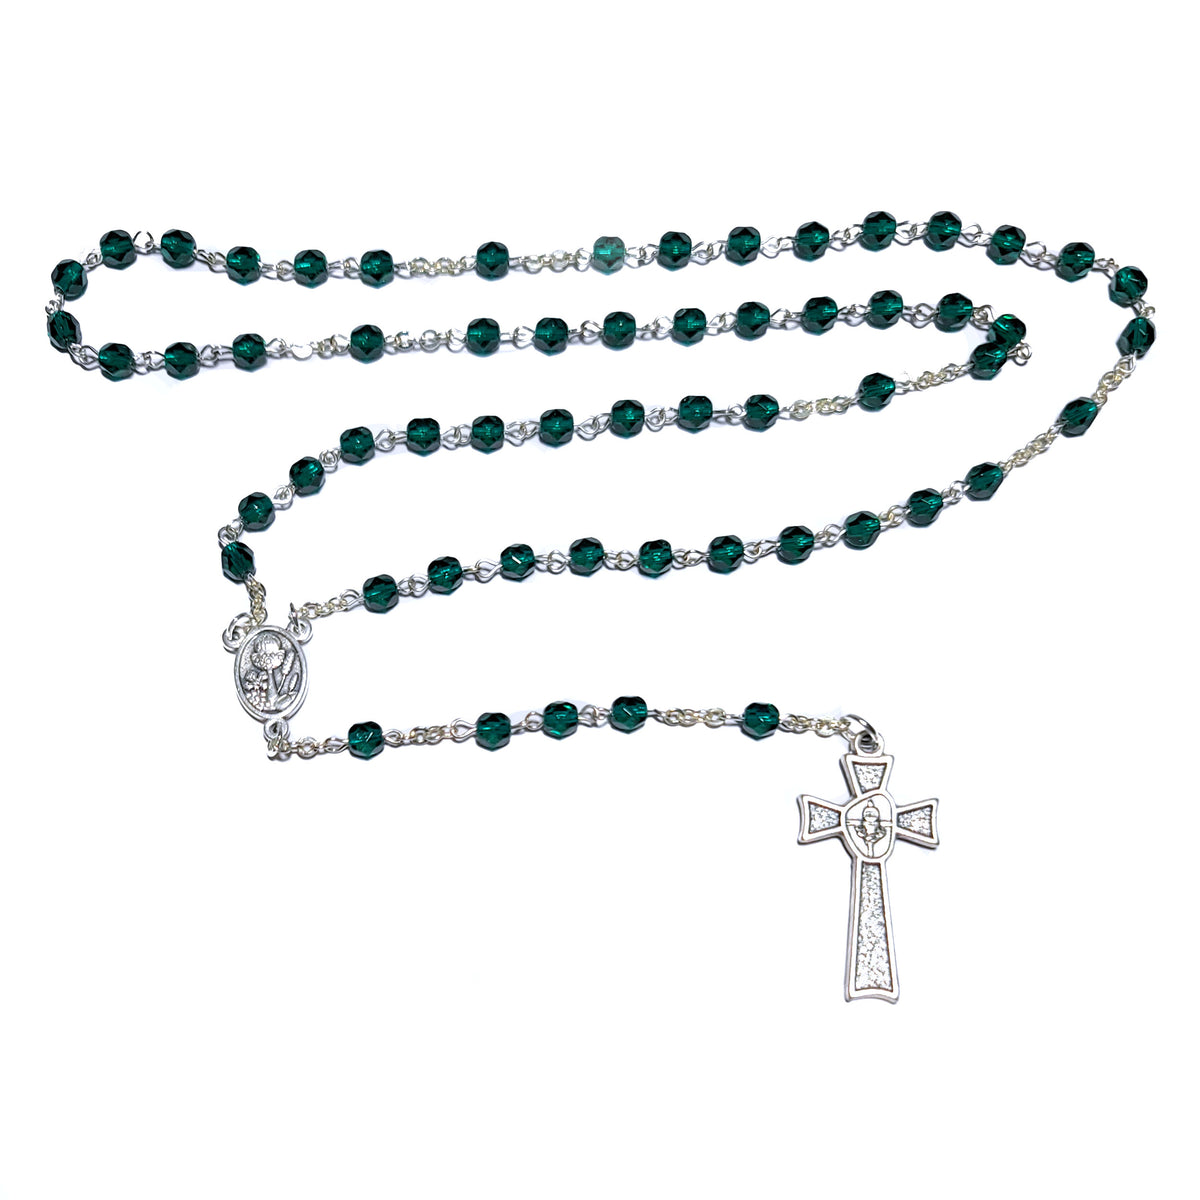 Rosary Kit, Emerald Green Catholic Prayer Beading Kit, First Communion Gift  For Kids, Rosary Necklace Making Supplies, 1 kit 